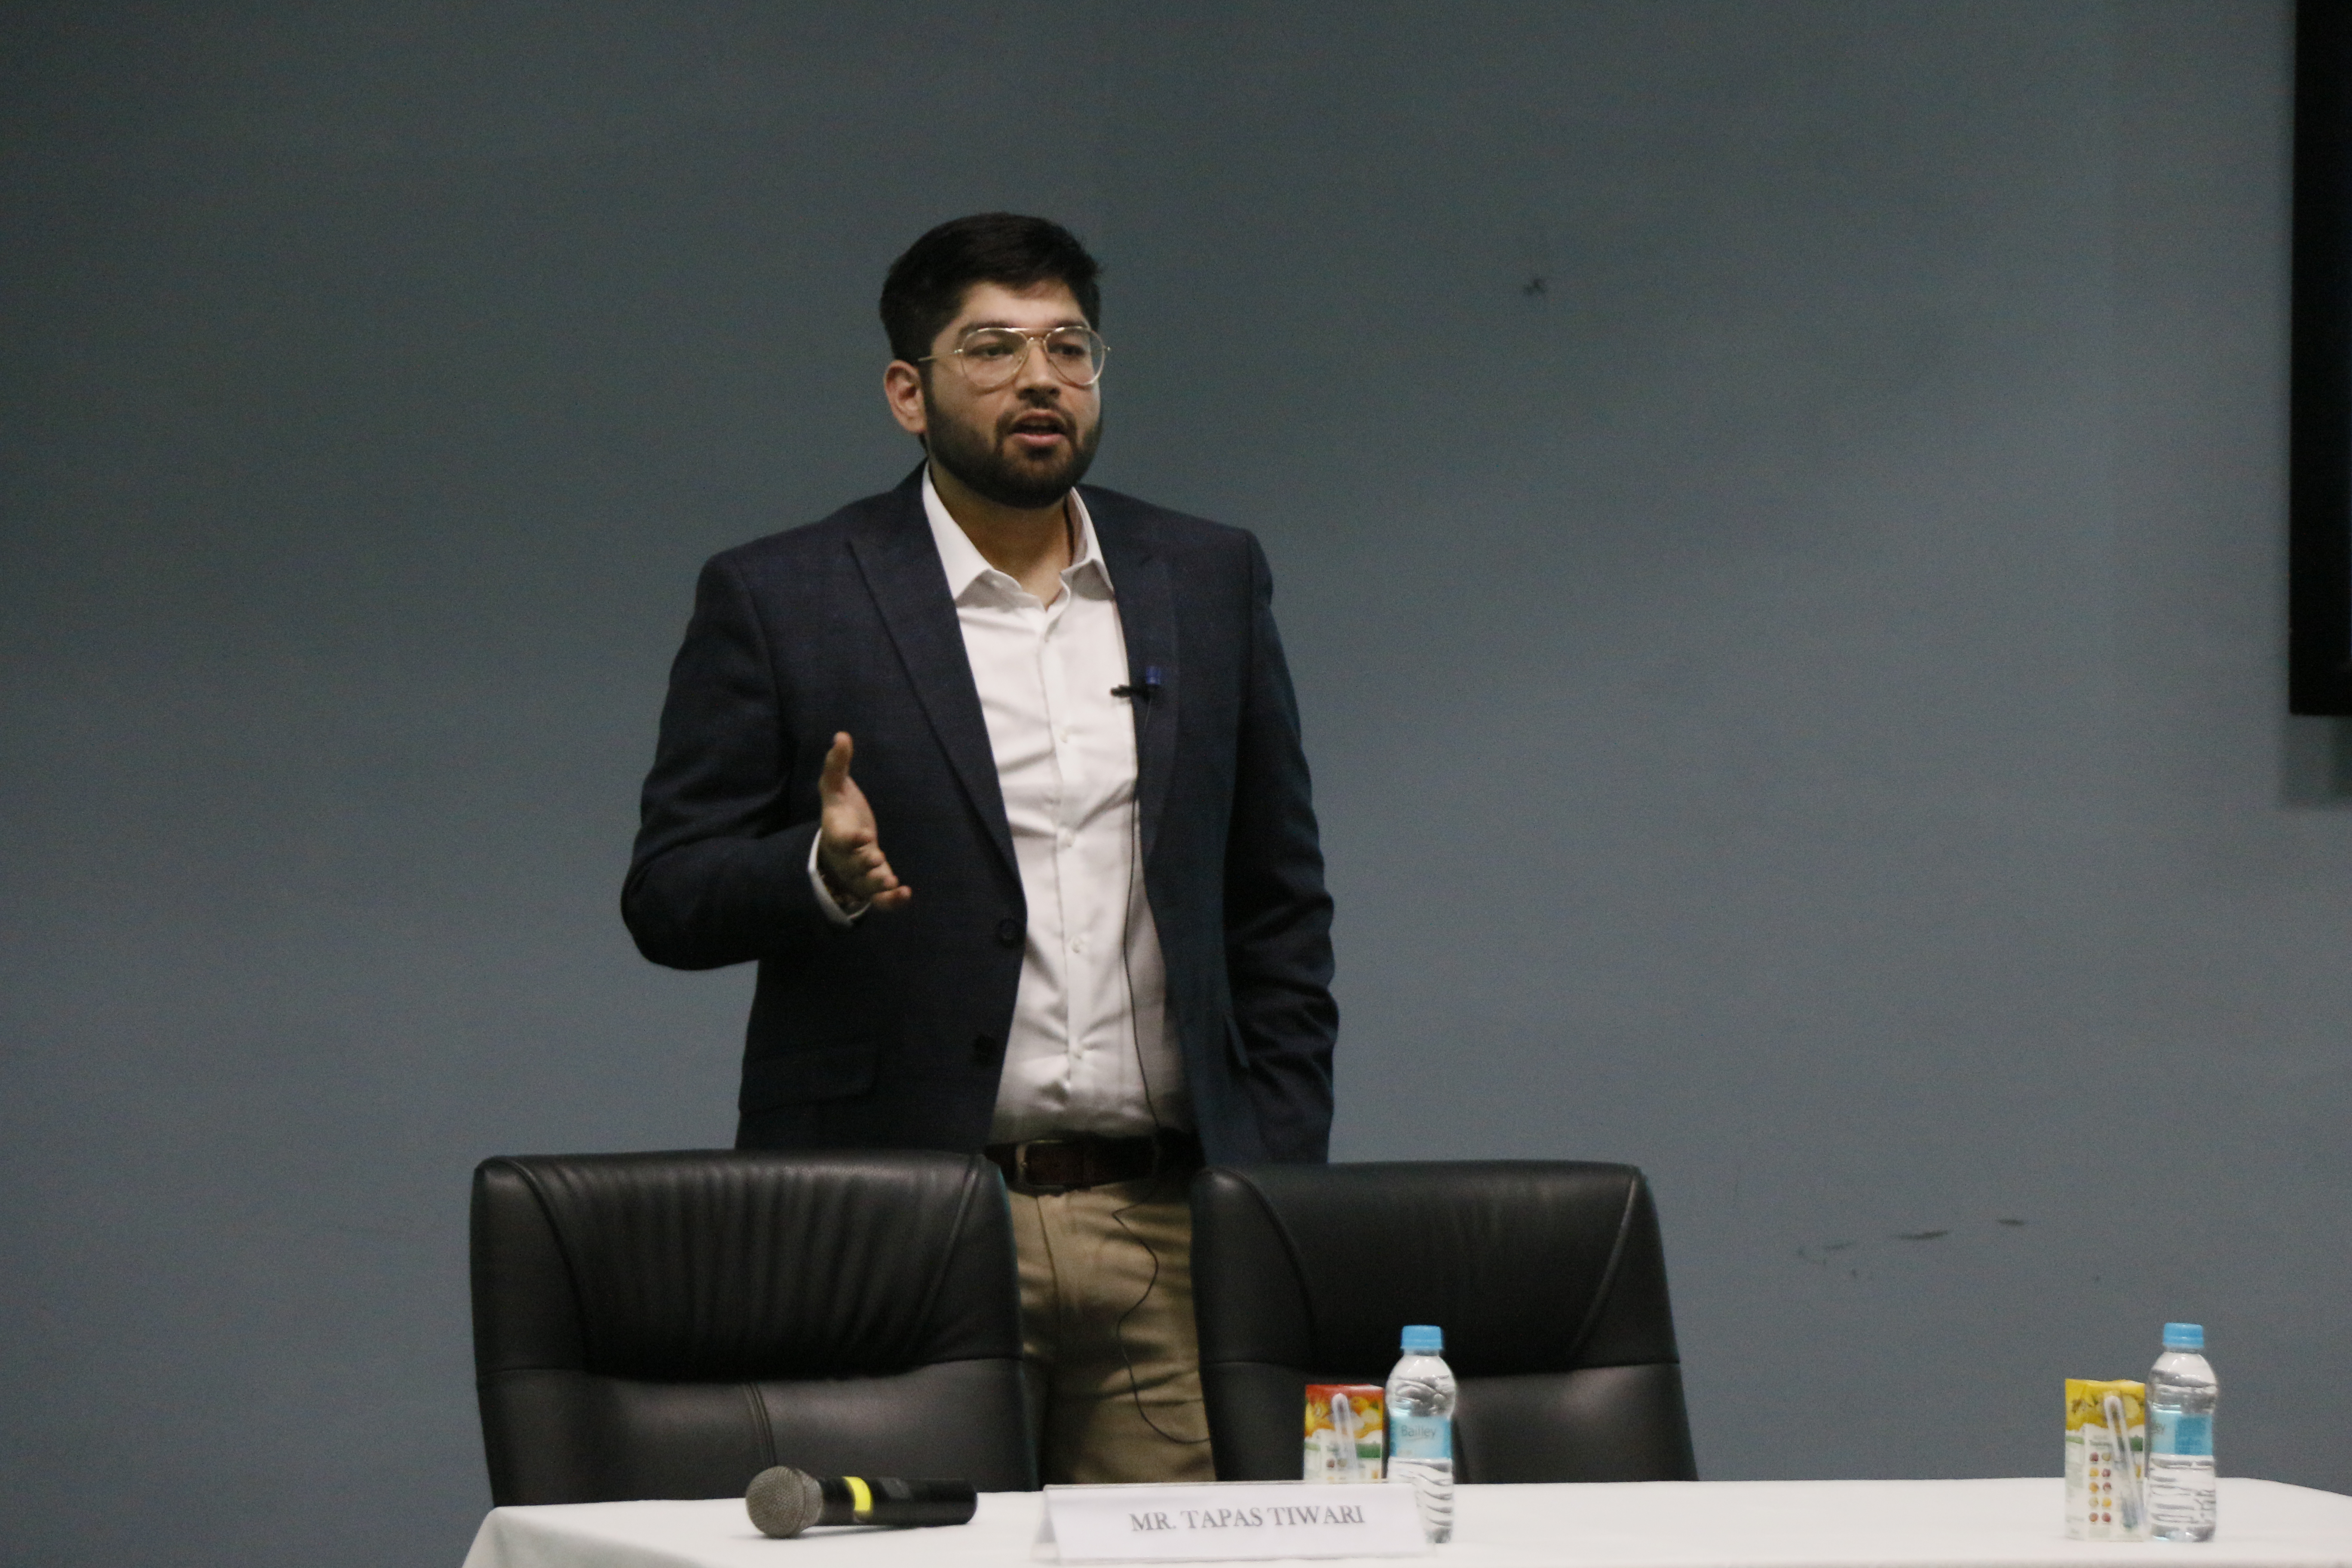 Vichar 1.0 : In Dialogue with Leaders 2019 - 20 : Mr. Tapas Tiwari, Advisor - Data and Analytics at Rio Tinto (Speaker)